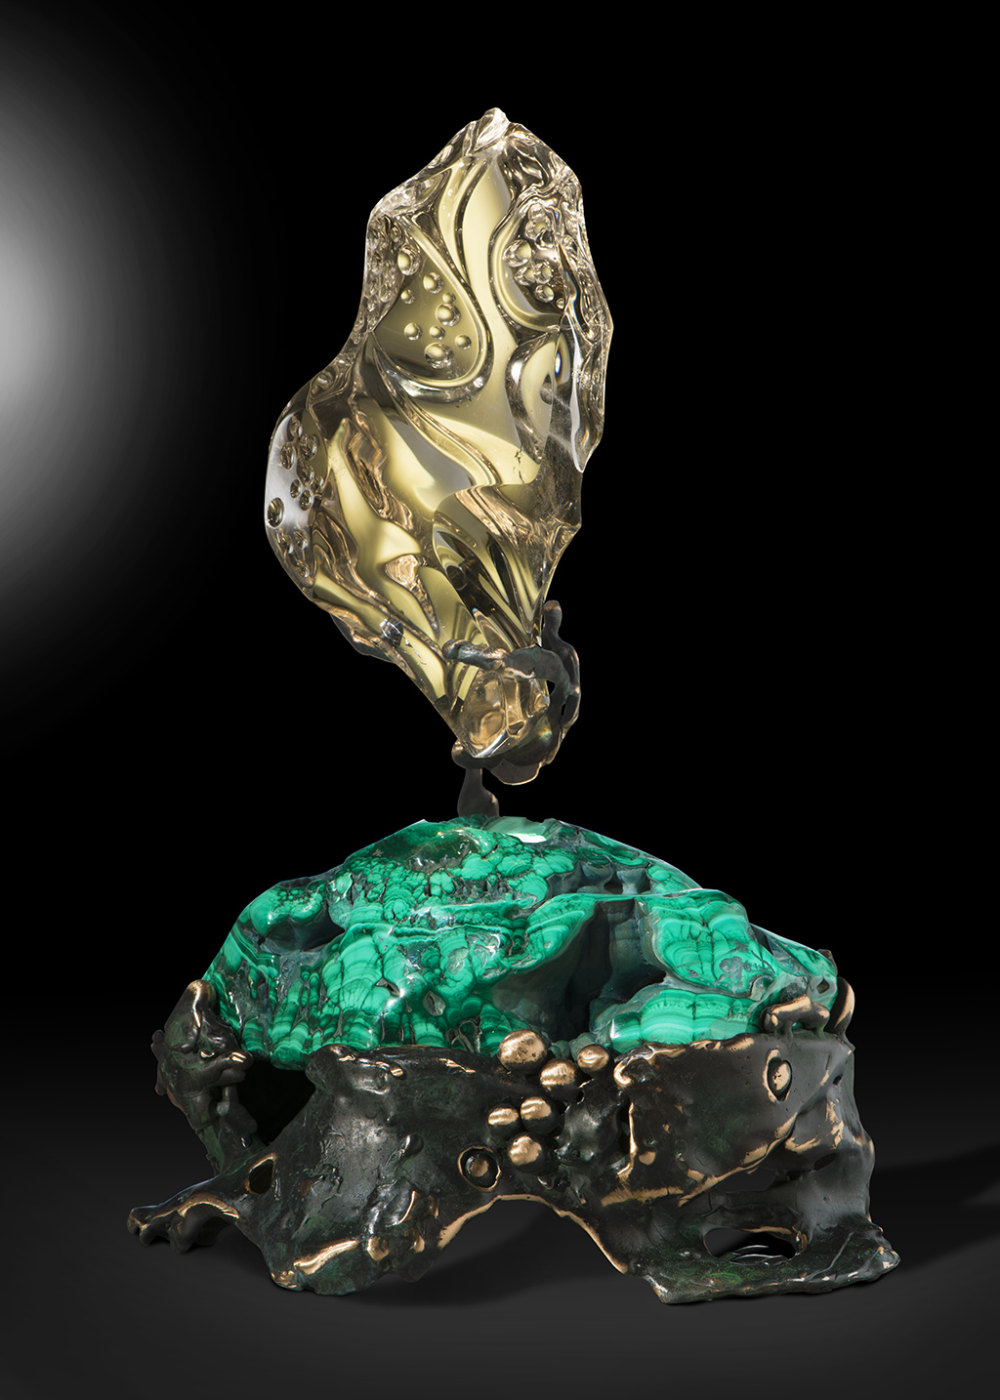 Spectacular-gemstone-sculptures-by-Lawrence-Stoller-www.rushi.-net-14.jpg